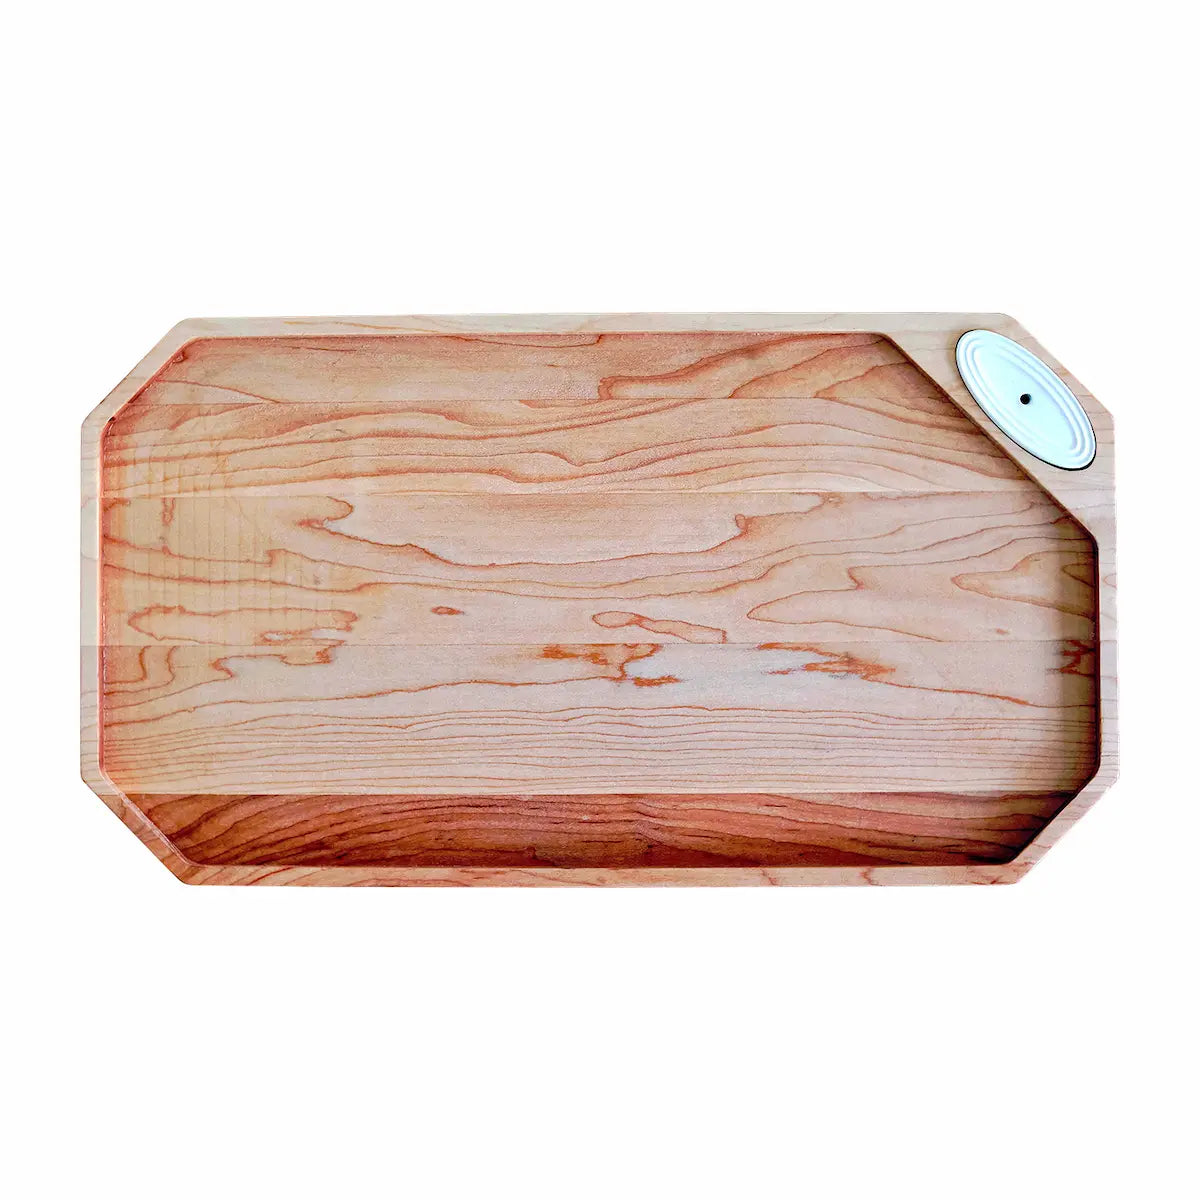 A limited edition Nora Fleming Octagonal Wood Board, with a slot to hold a Nora Fleming Mini.